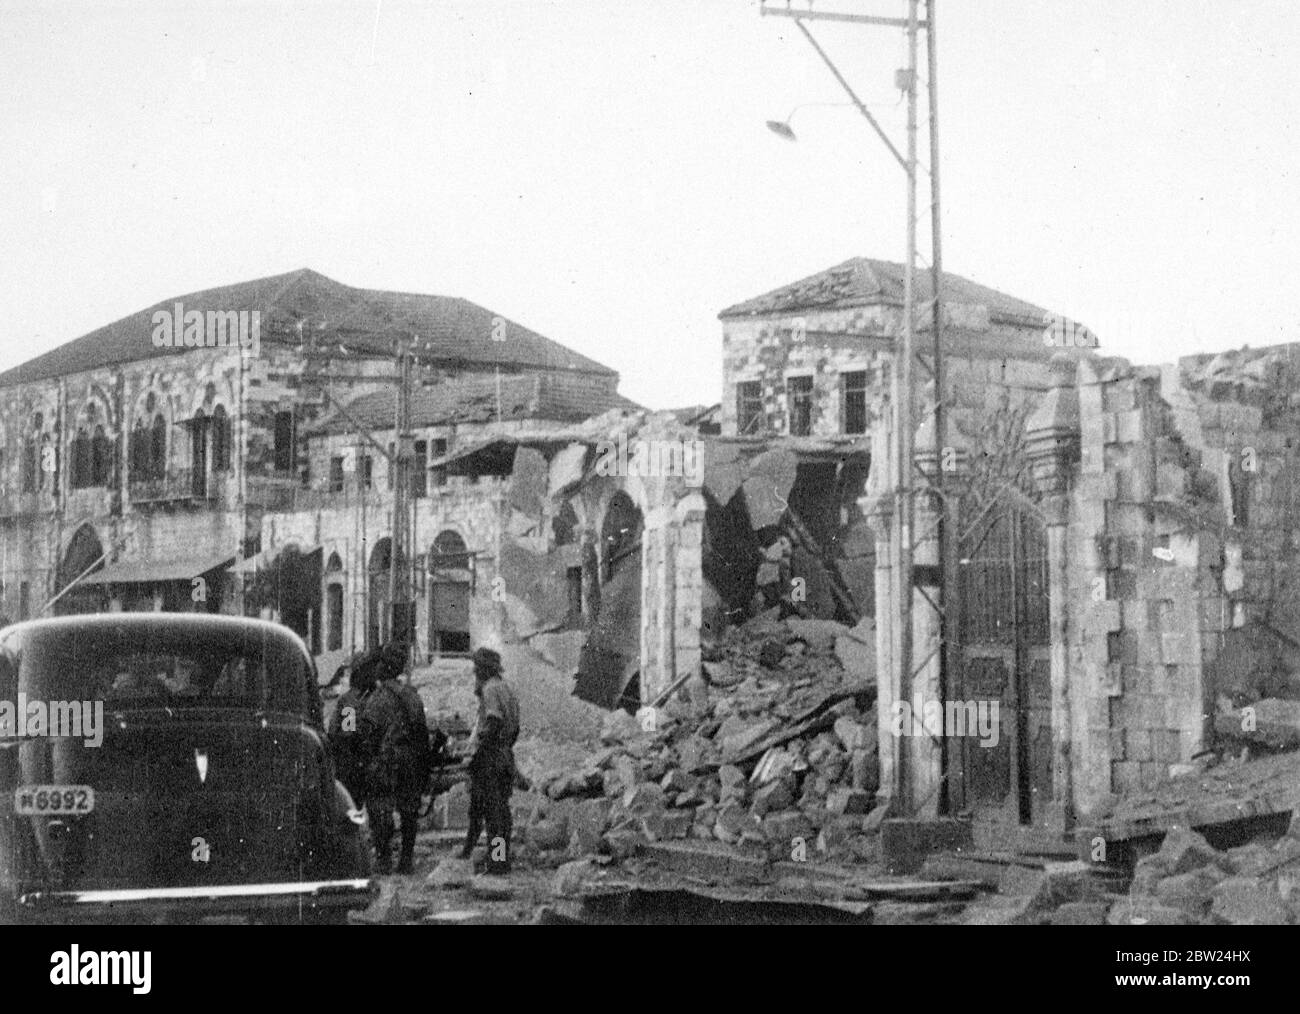 British troops, blow up 100 Arab houses in Palestine town. Royal Engineers dynamited over 100 Arab houses in Jenin, Palestine, following the murder by Arabs and Assistant District Commissioner Moffett of Jenin. The houses were destroyed, partly as a punitive measure against the inhabitants of the town having harboured Arab rebels and partly for reasons of security, houses in Jenin was built so close to one another that police and military patrolling was impossible. Photo shows,the ruins of Jenin. 5 September 1938 Stock Photo